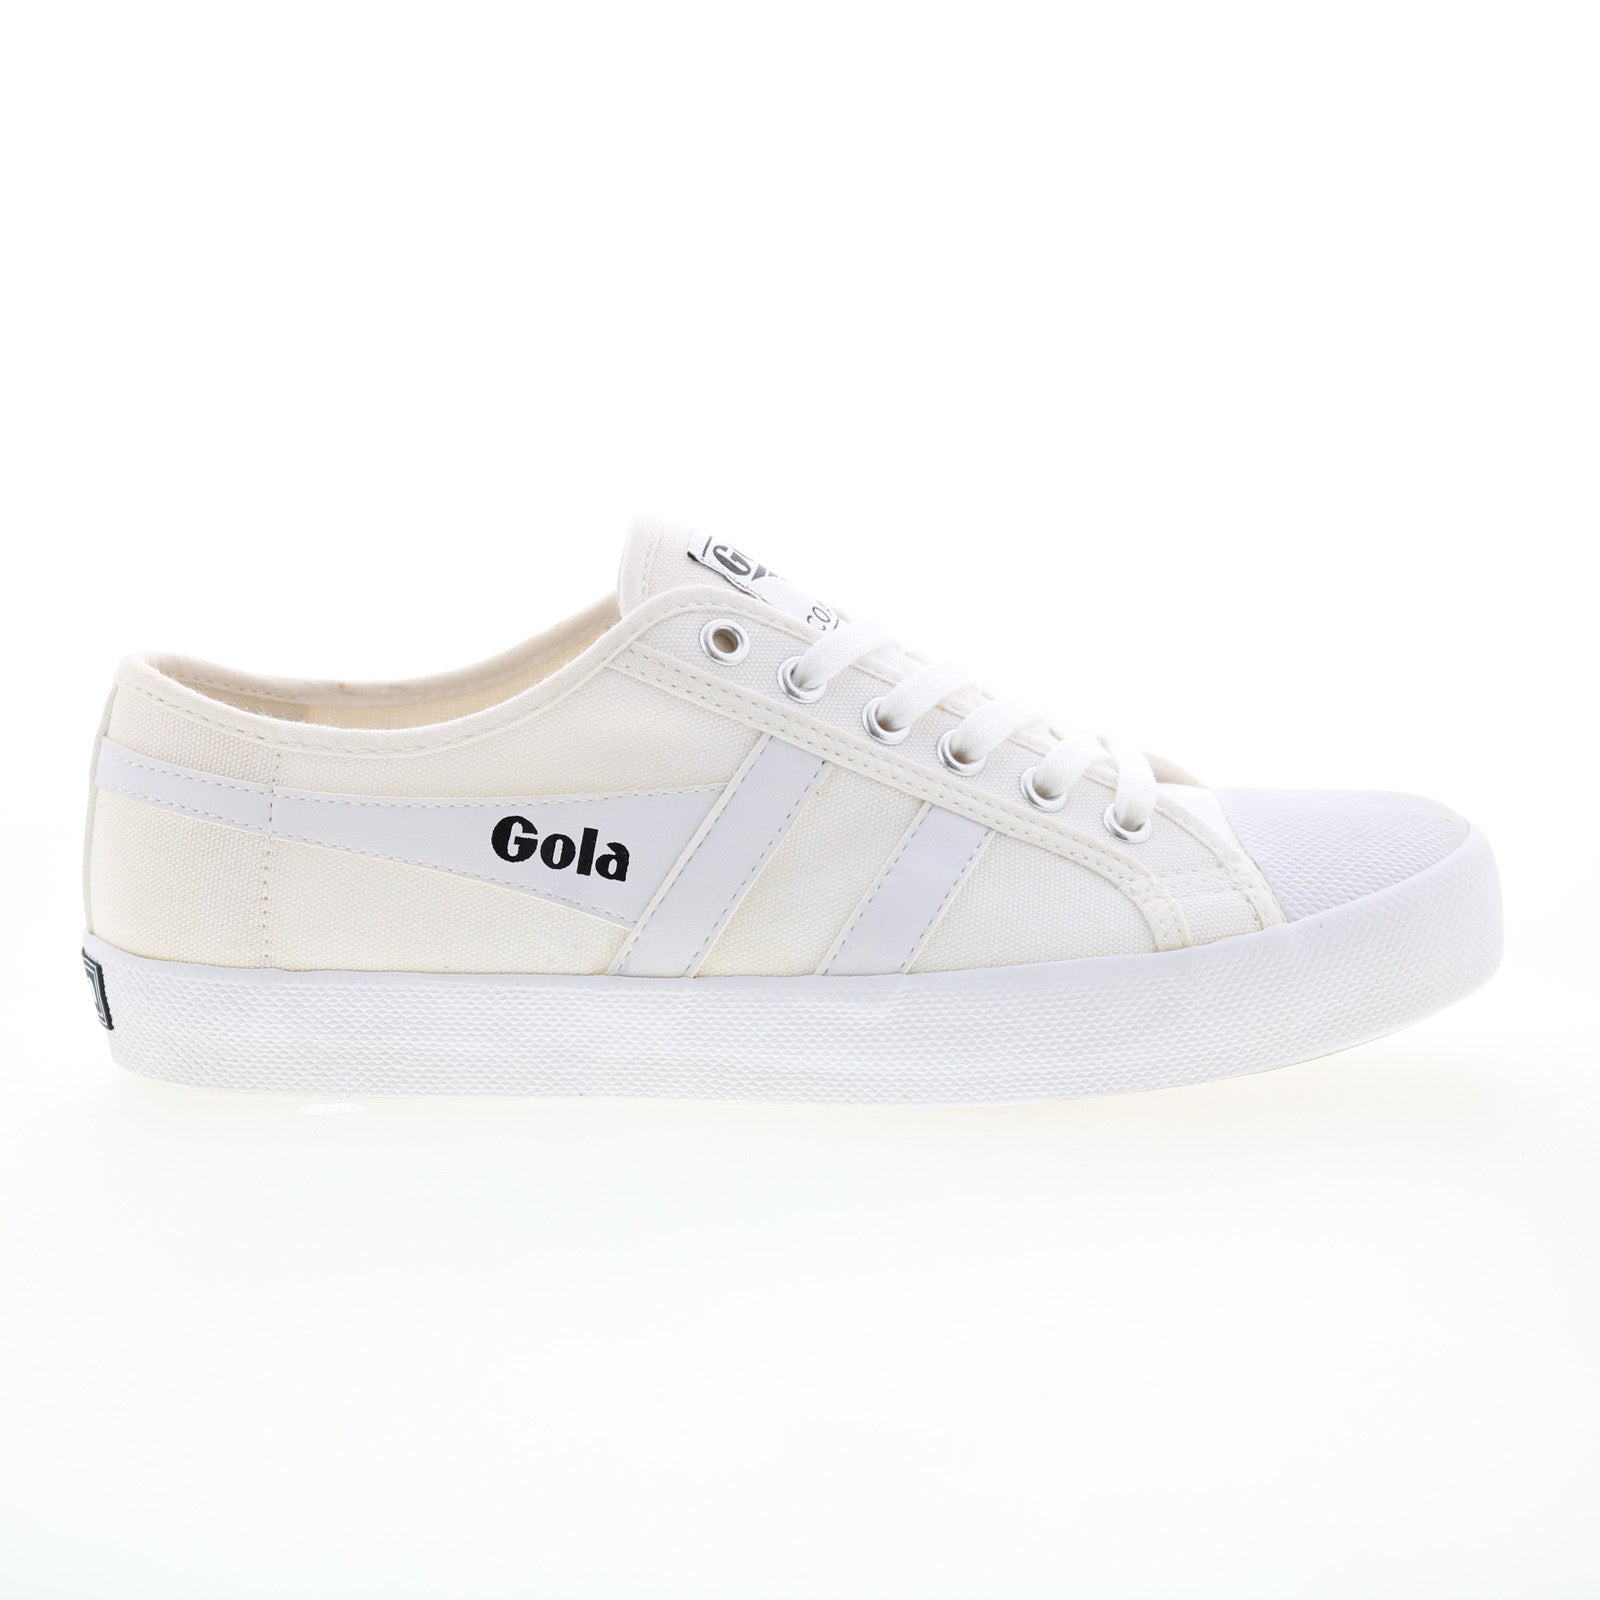 Gola Coaster CMA174 Mens Beige Canvas Lace Up Lifestyle Sneakers Shoes